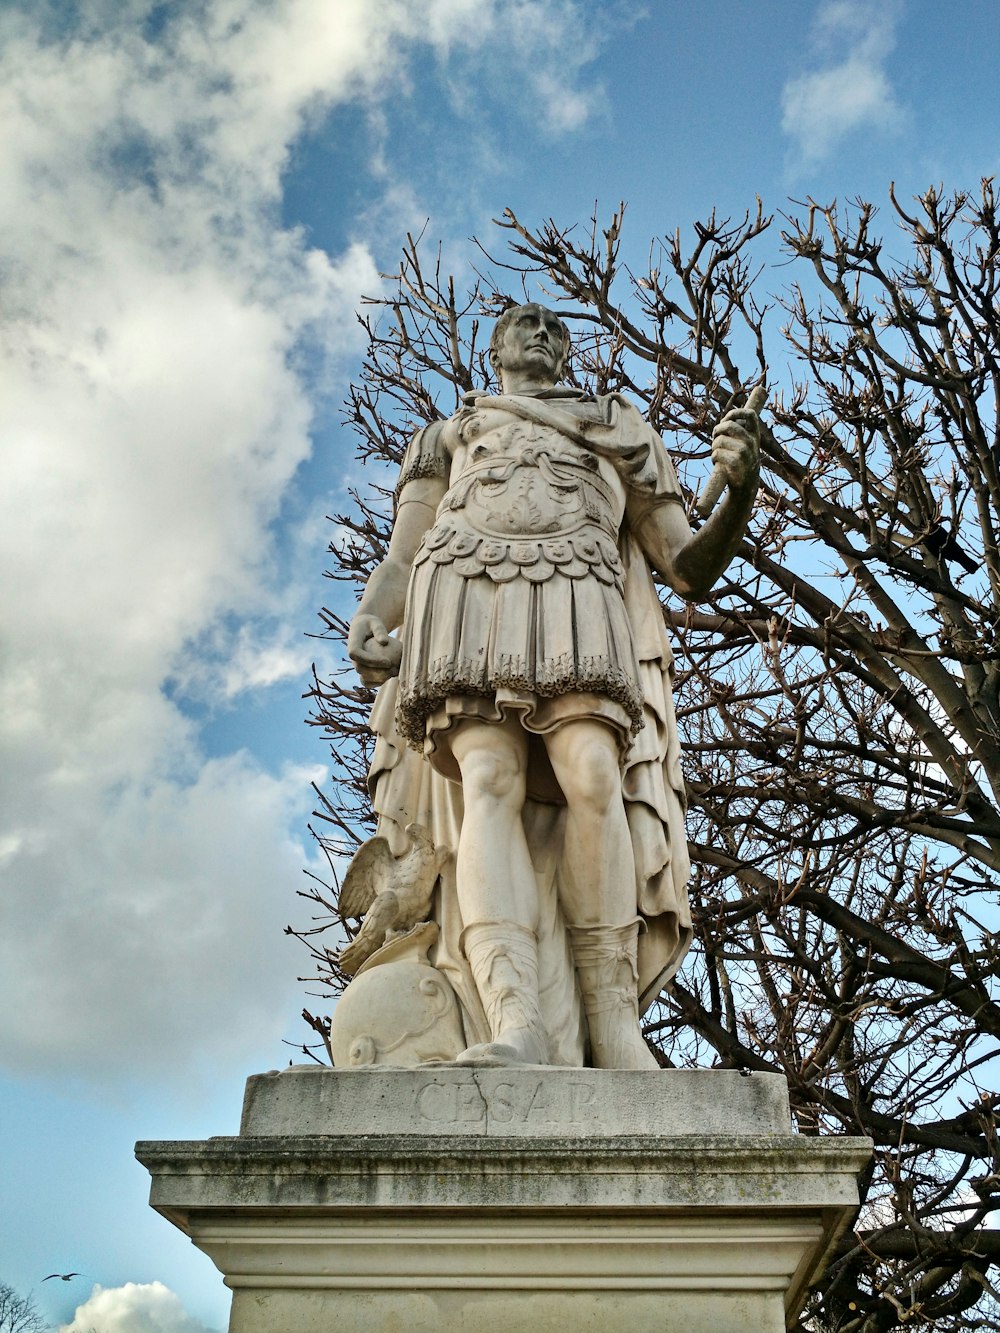 a statue of a man standing next to a tree